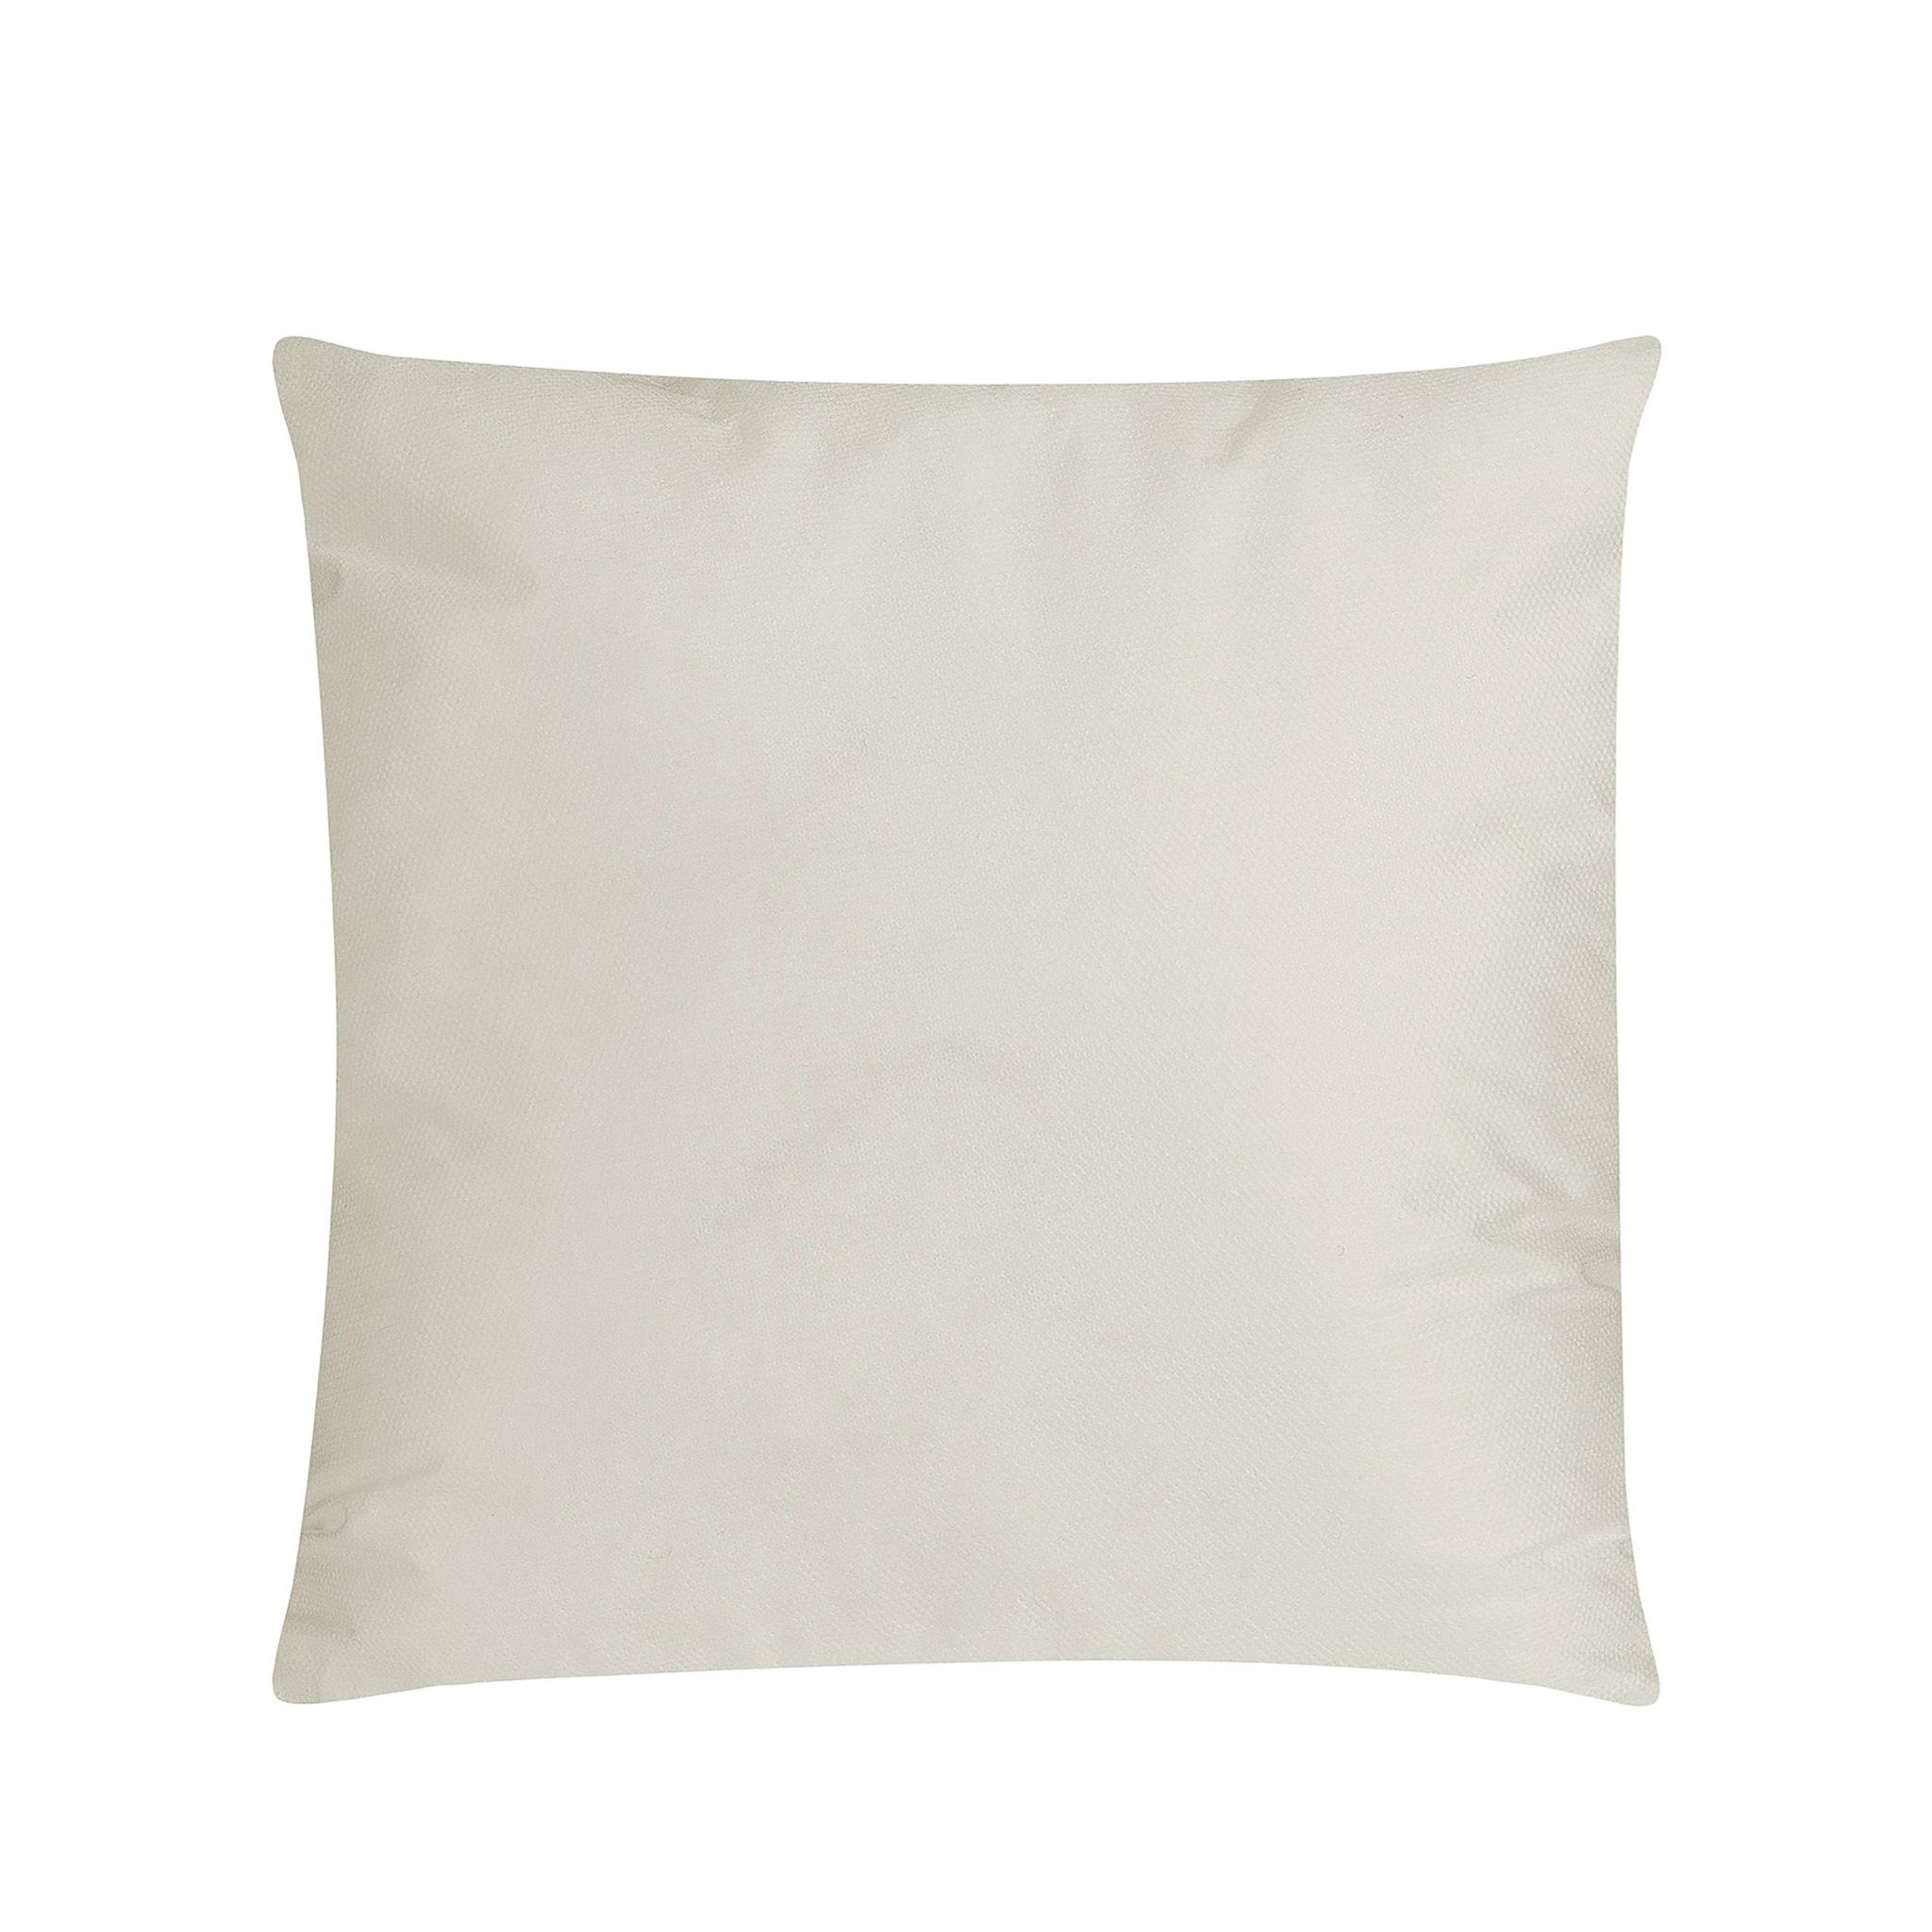 BLOMUS // FILL - CUSHION FILLING | 50 X 50 CM MADE OF 100% RECYCLED FEATHERS | WHITE